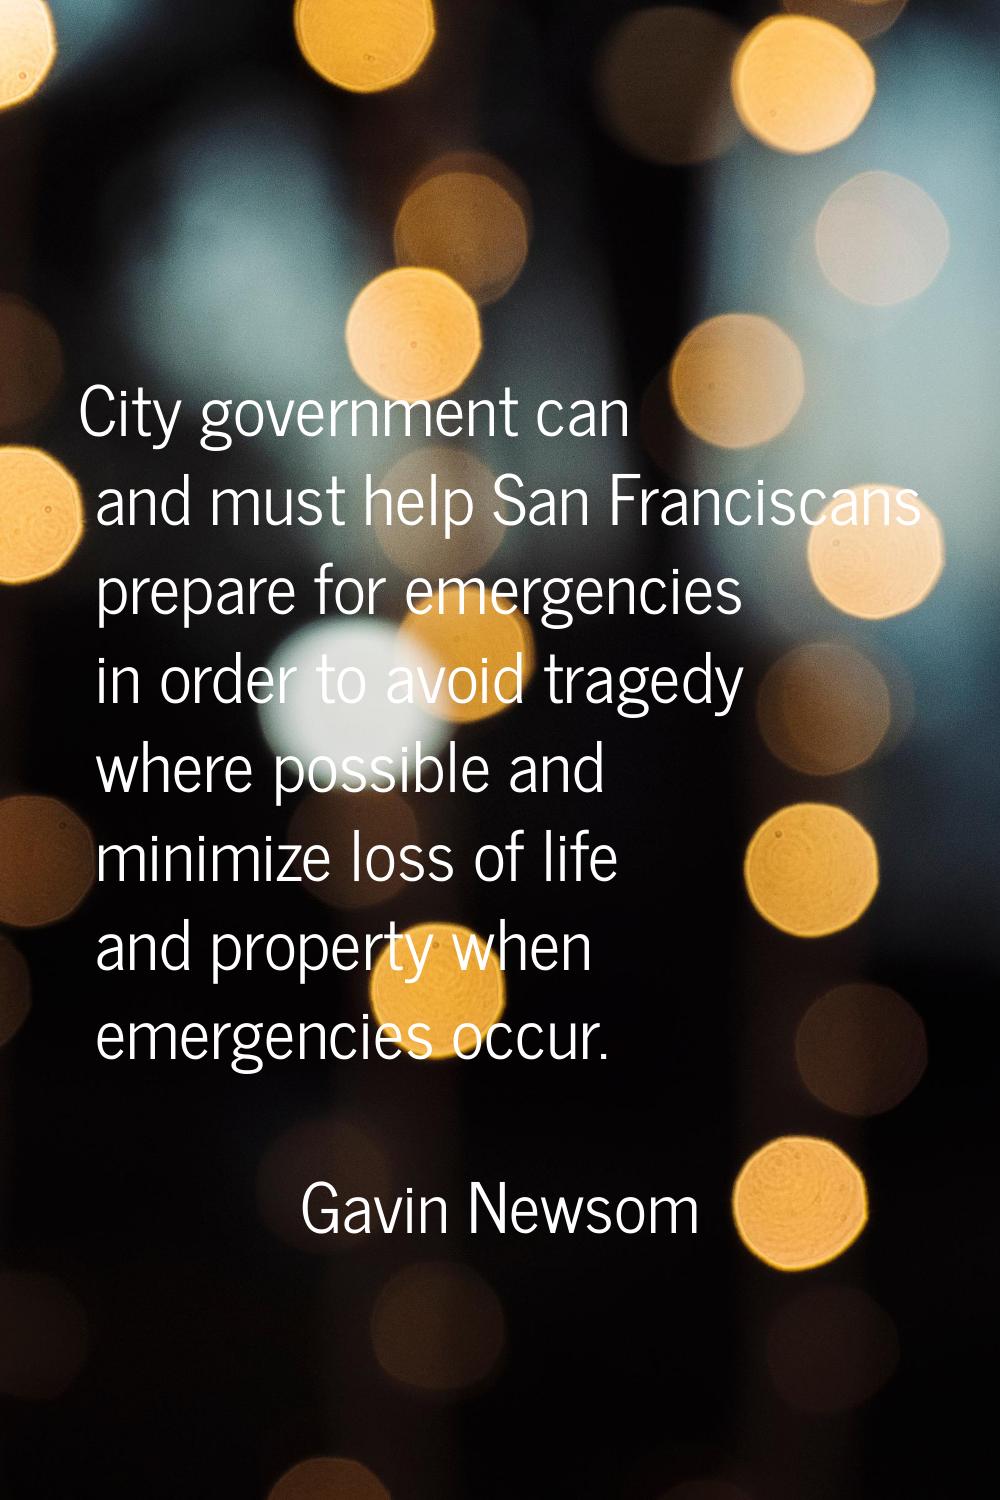 City government can and must help San Franciscans prepare for emergencies in order to avoid tragedy